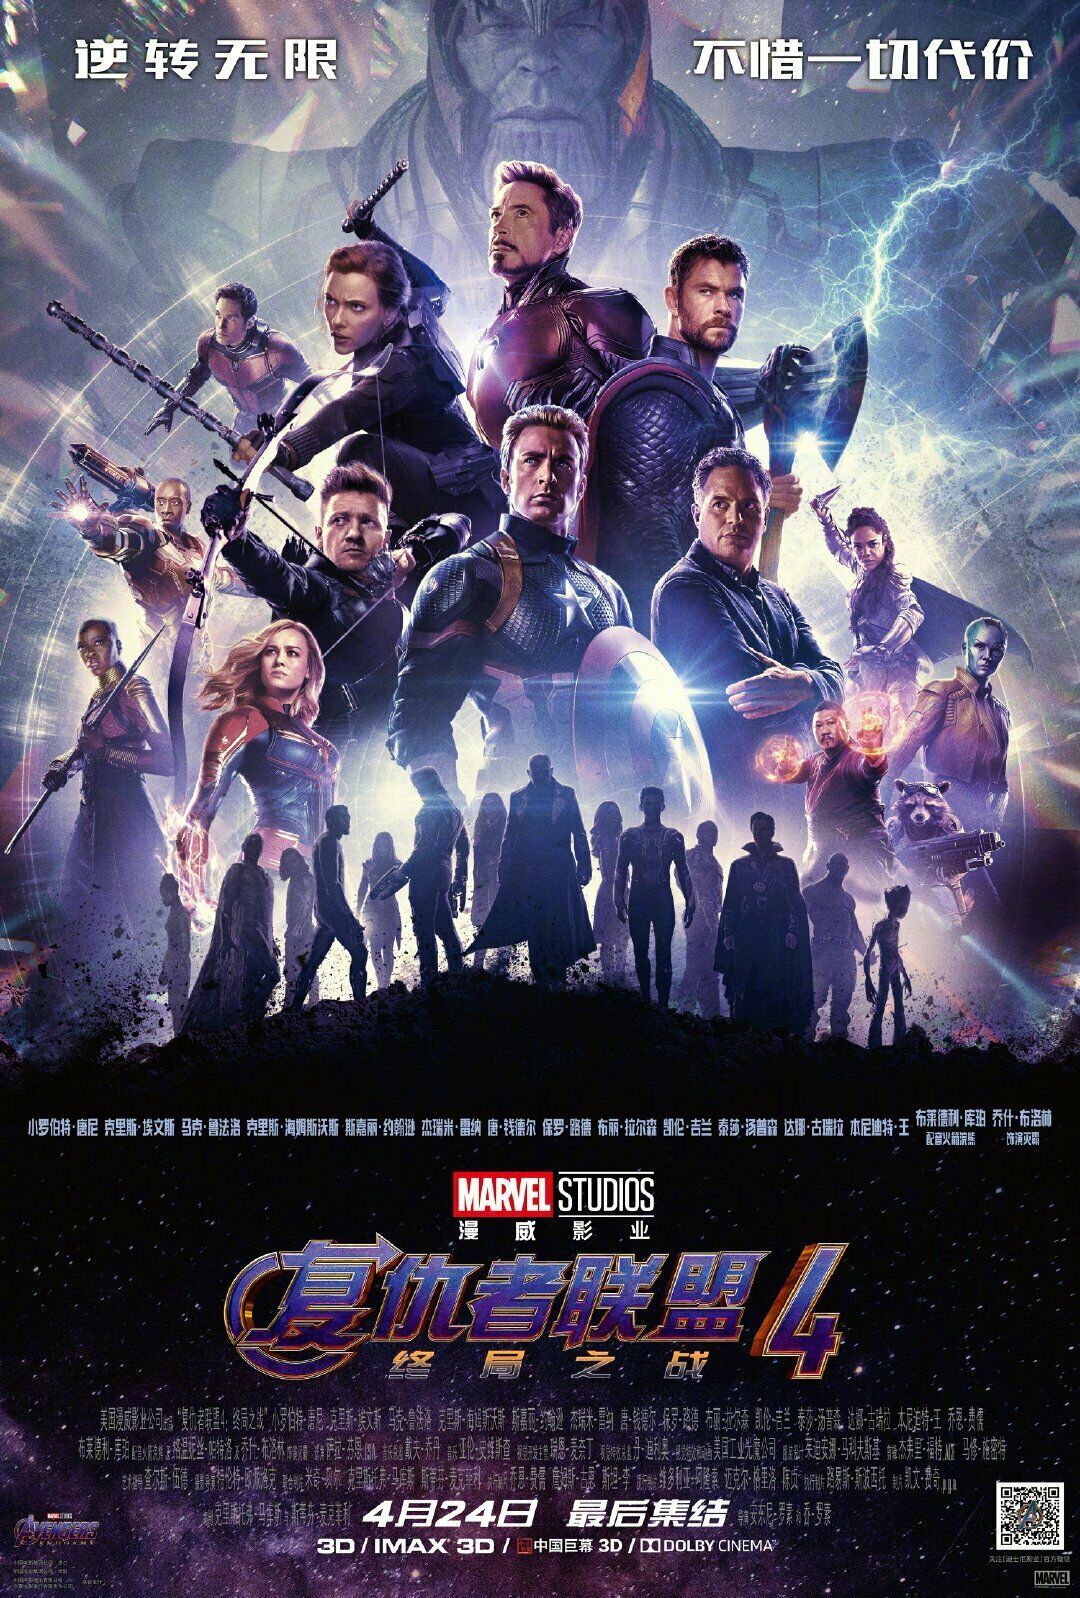 Avengers End Game Poster Chinese Marvel Movie Art Film Print 11x17 24x36 27x40